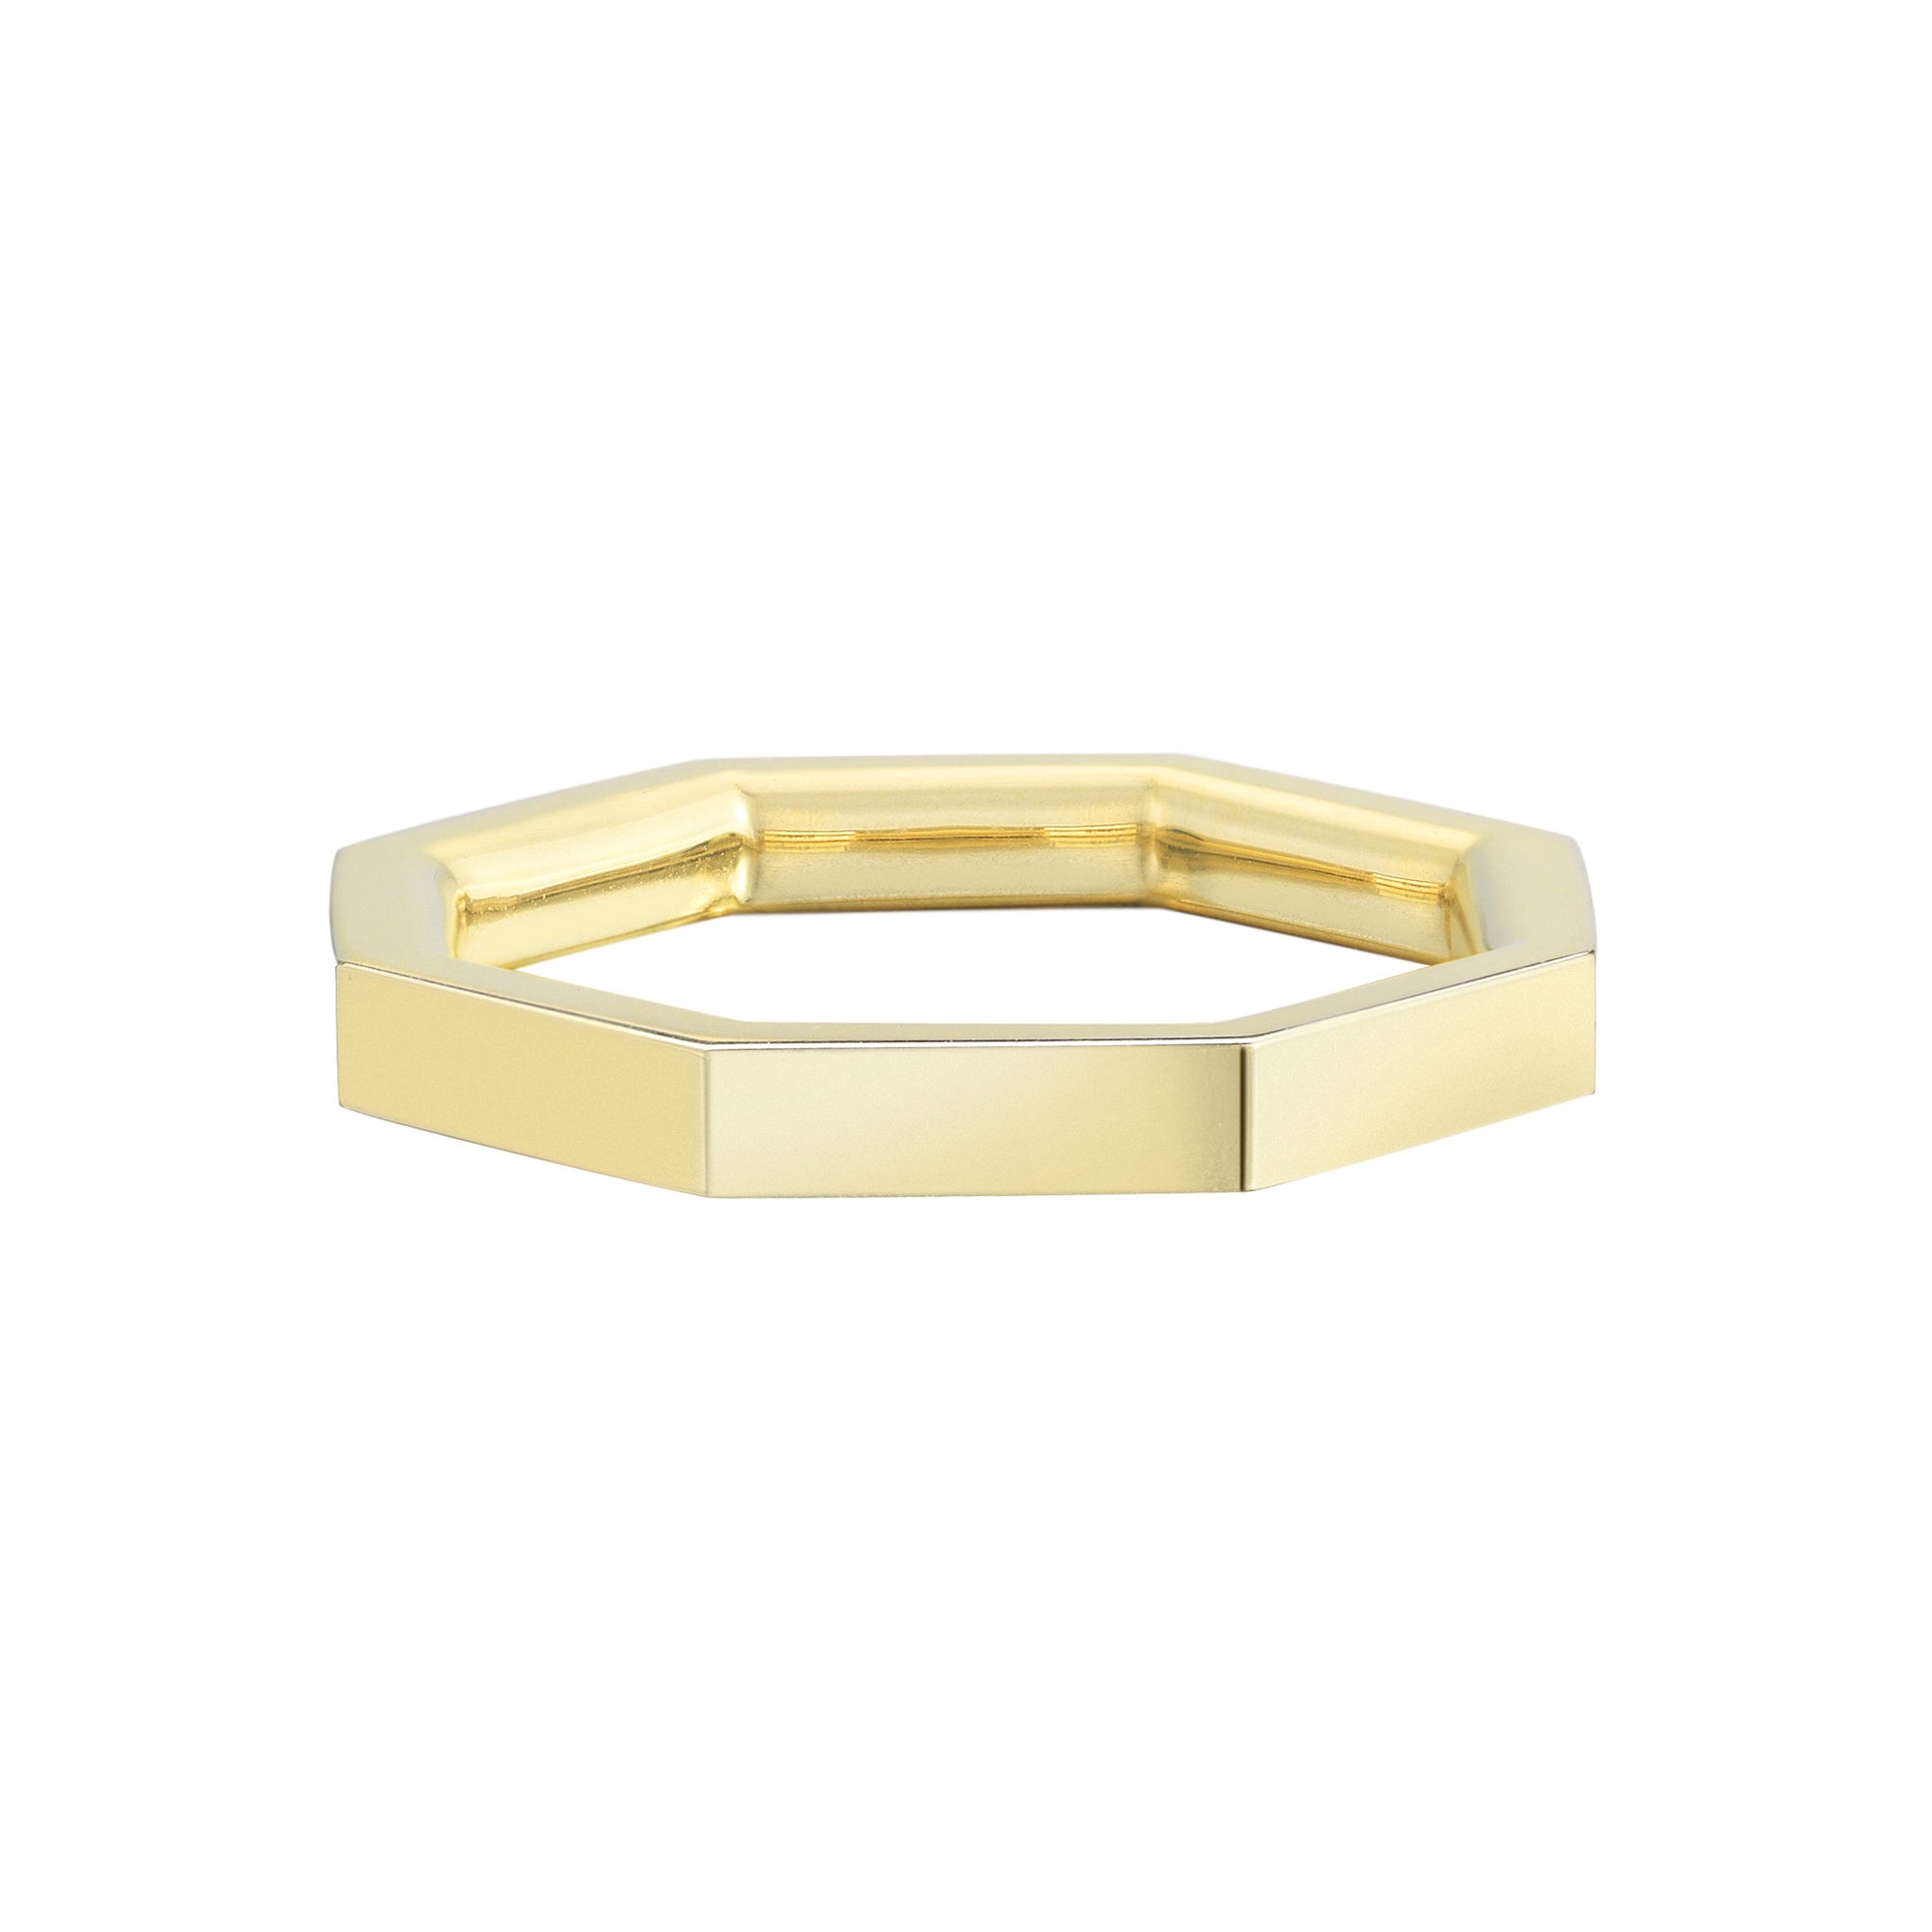 comfortable geometric minimalistic ring or wedding band in 18k gold by finn by candice pool neistat